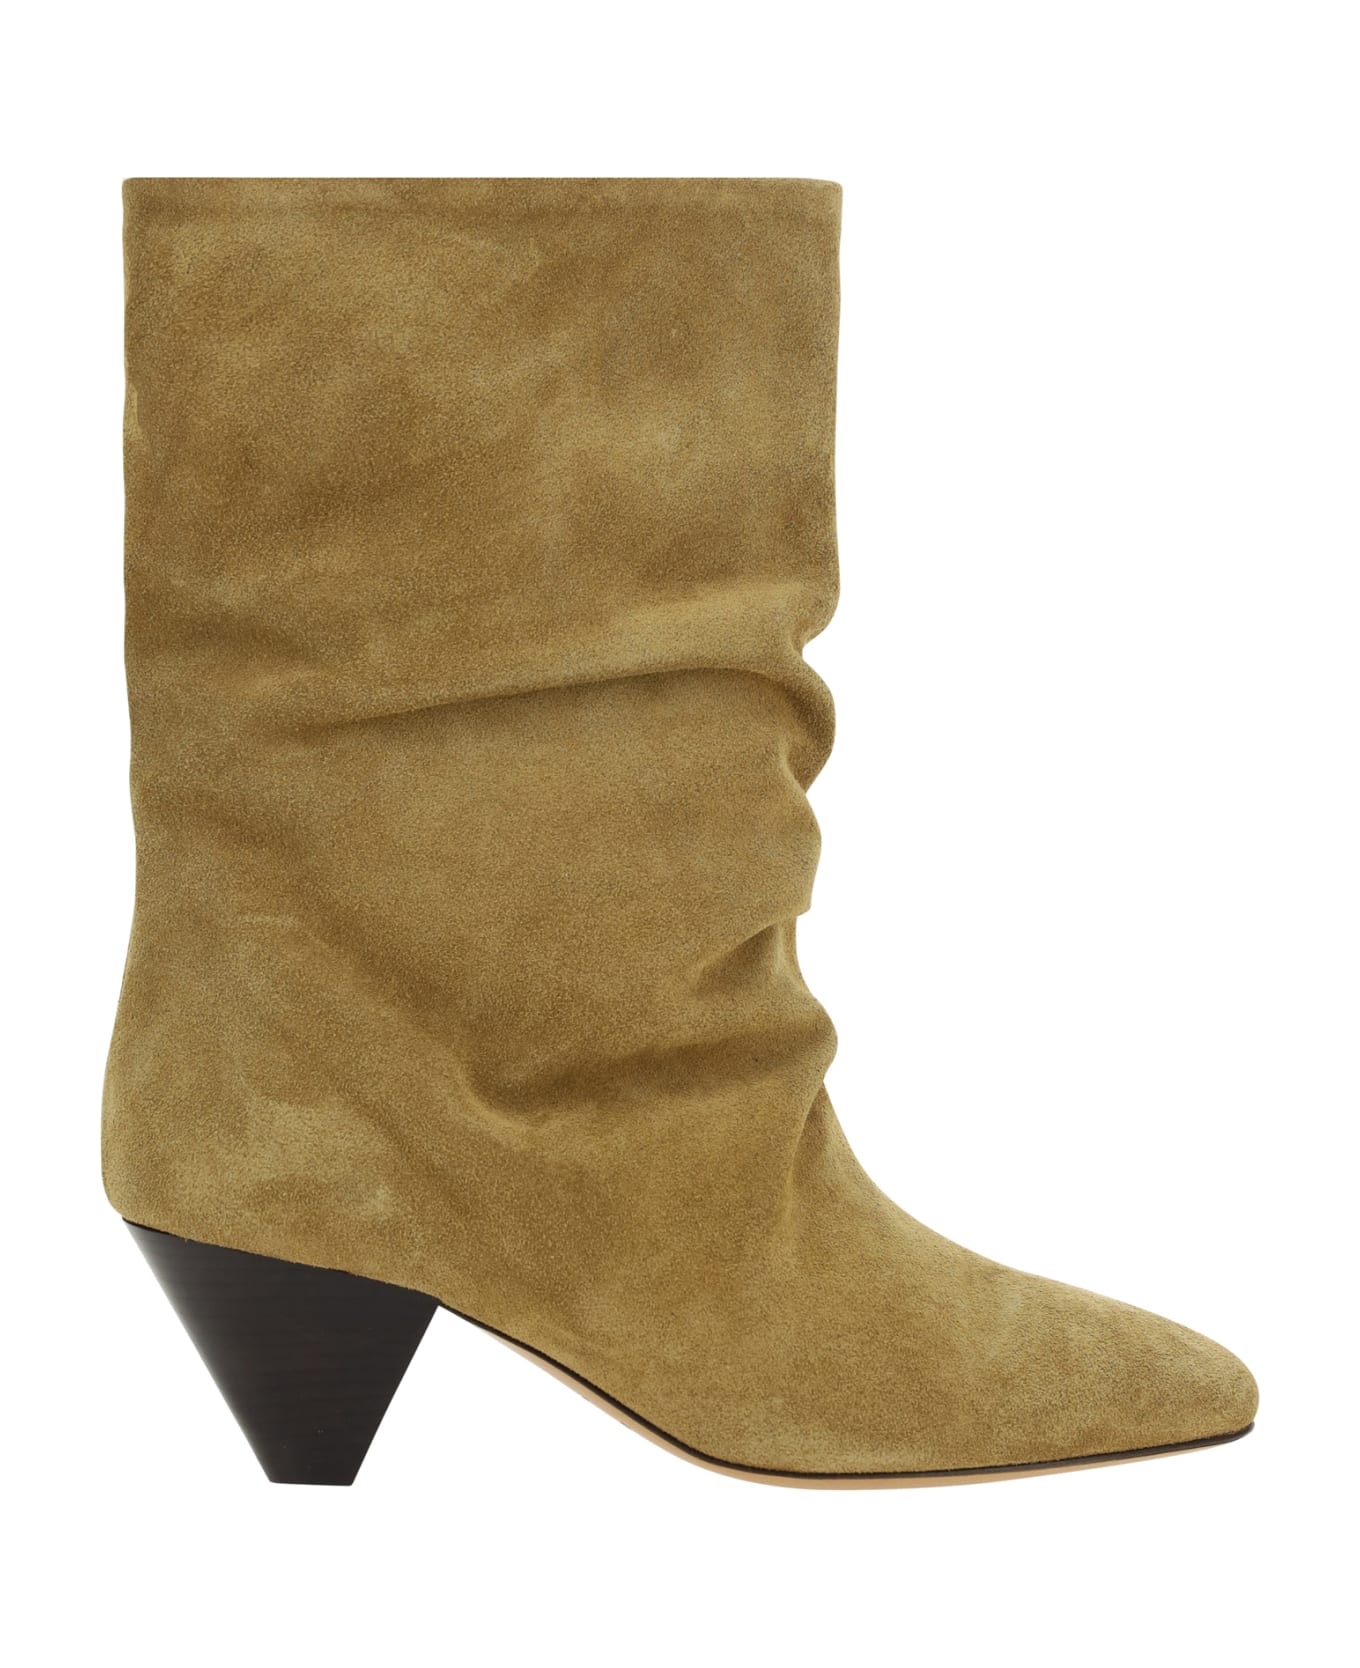 Isabel Marant Reachi Ankle Boots - Brown ブーツ